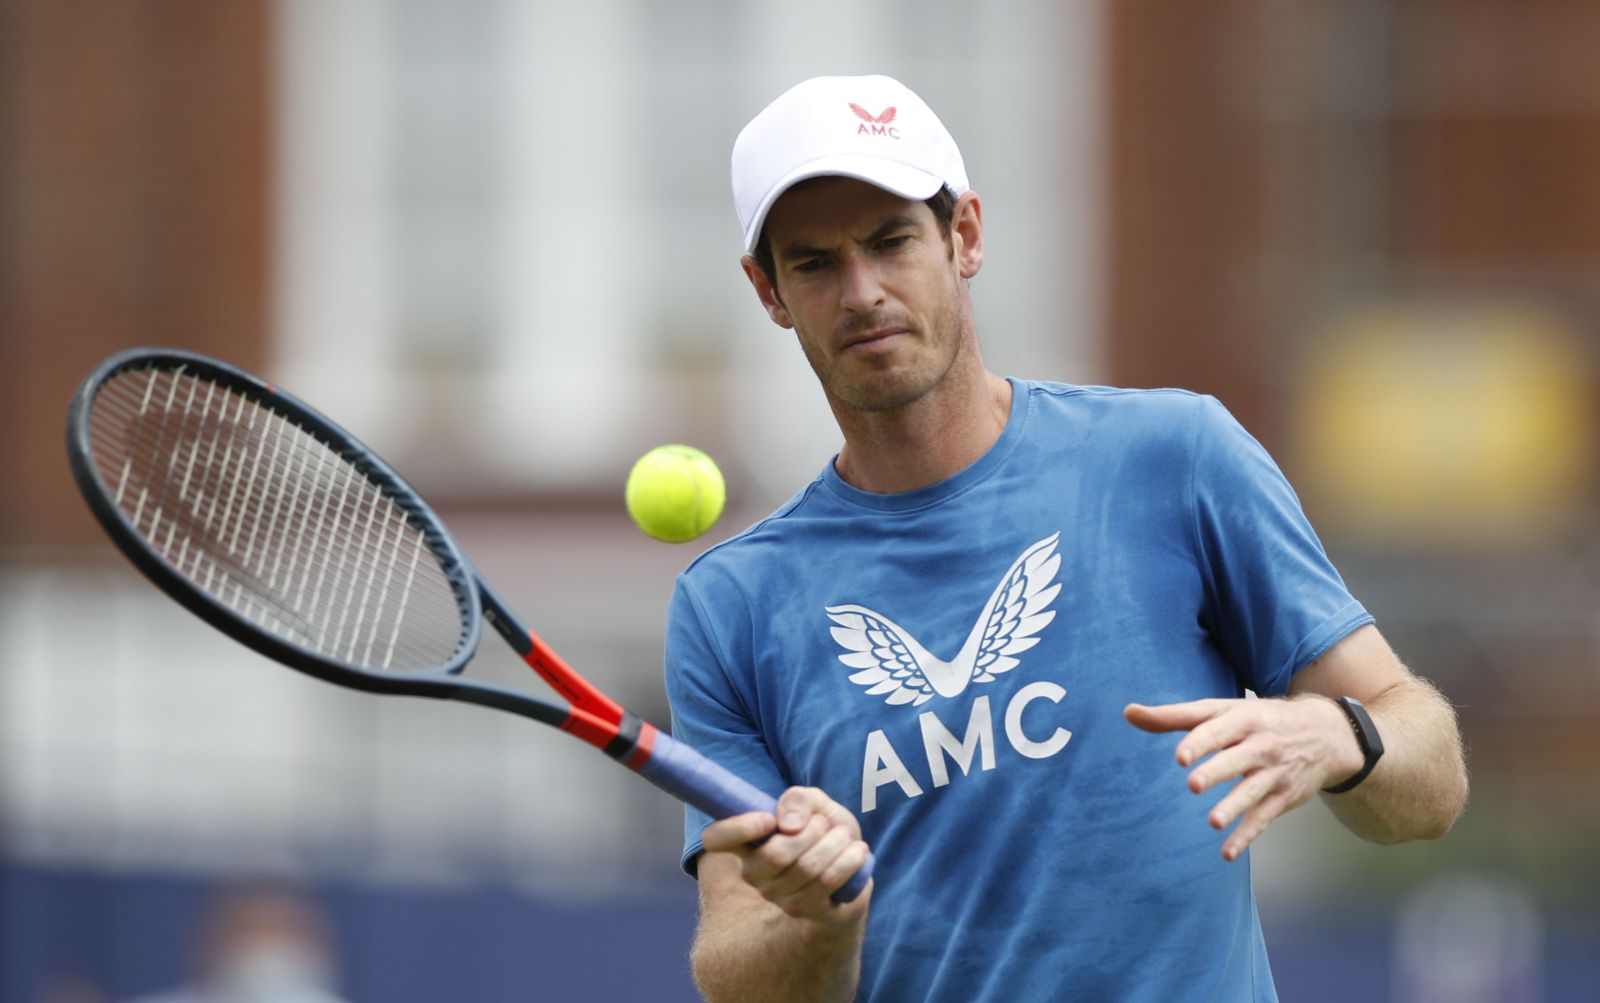 Tennis - ATP 500 - Queen's Club Championships - Queen's Club, London, Britain - June 16, 2021 Britain's Andy Murray during a practice session Action Images via Reuters/Paul Childs